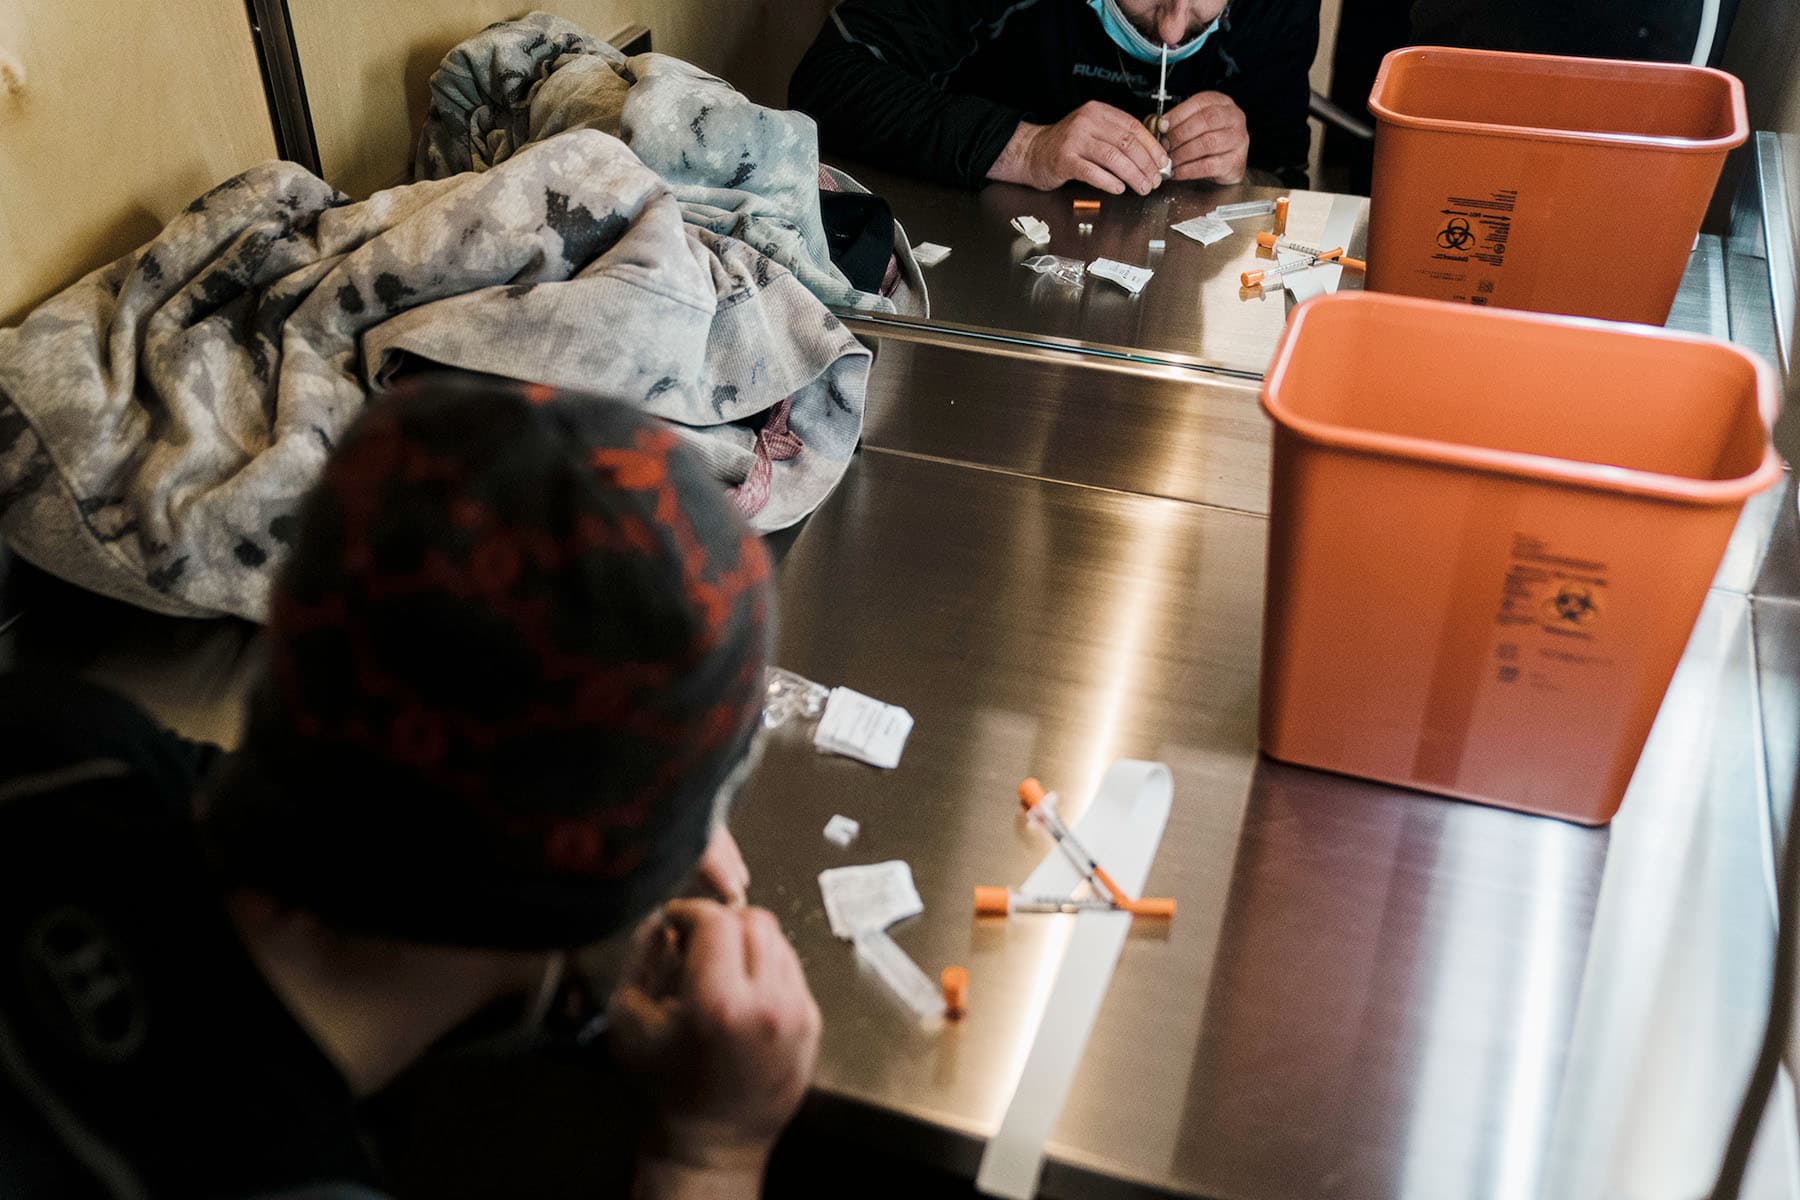 Is There a Future for Safe Drug Consumption Sites?